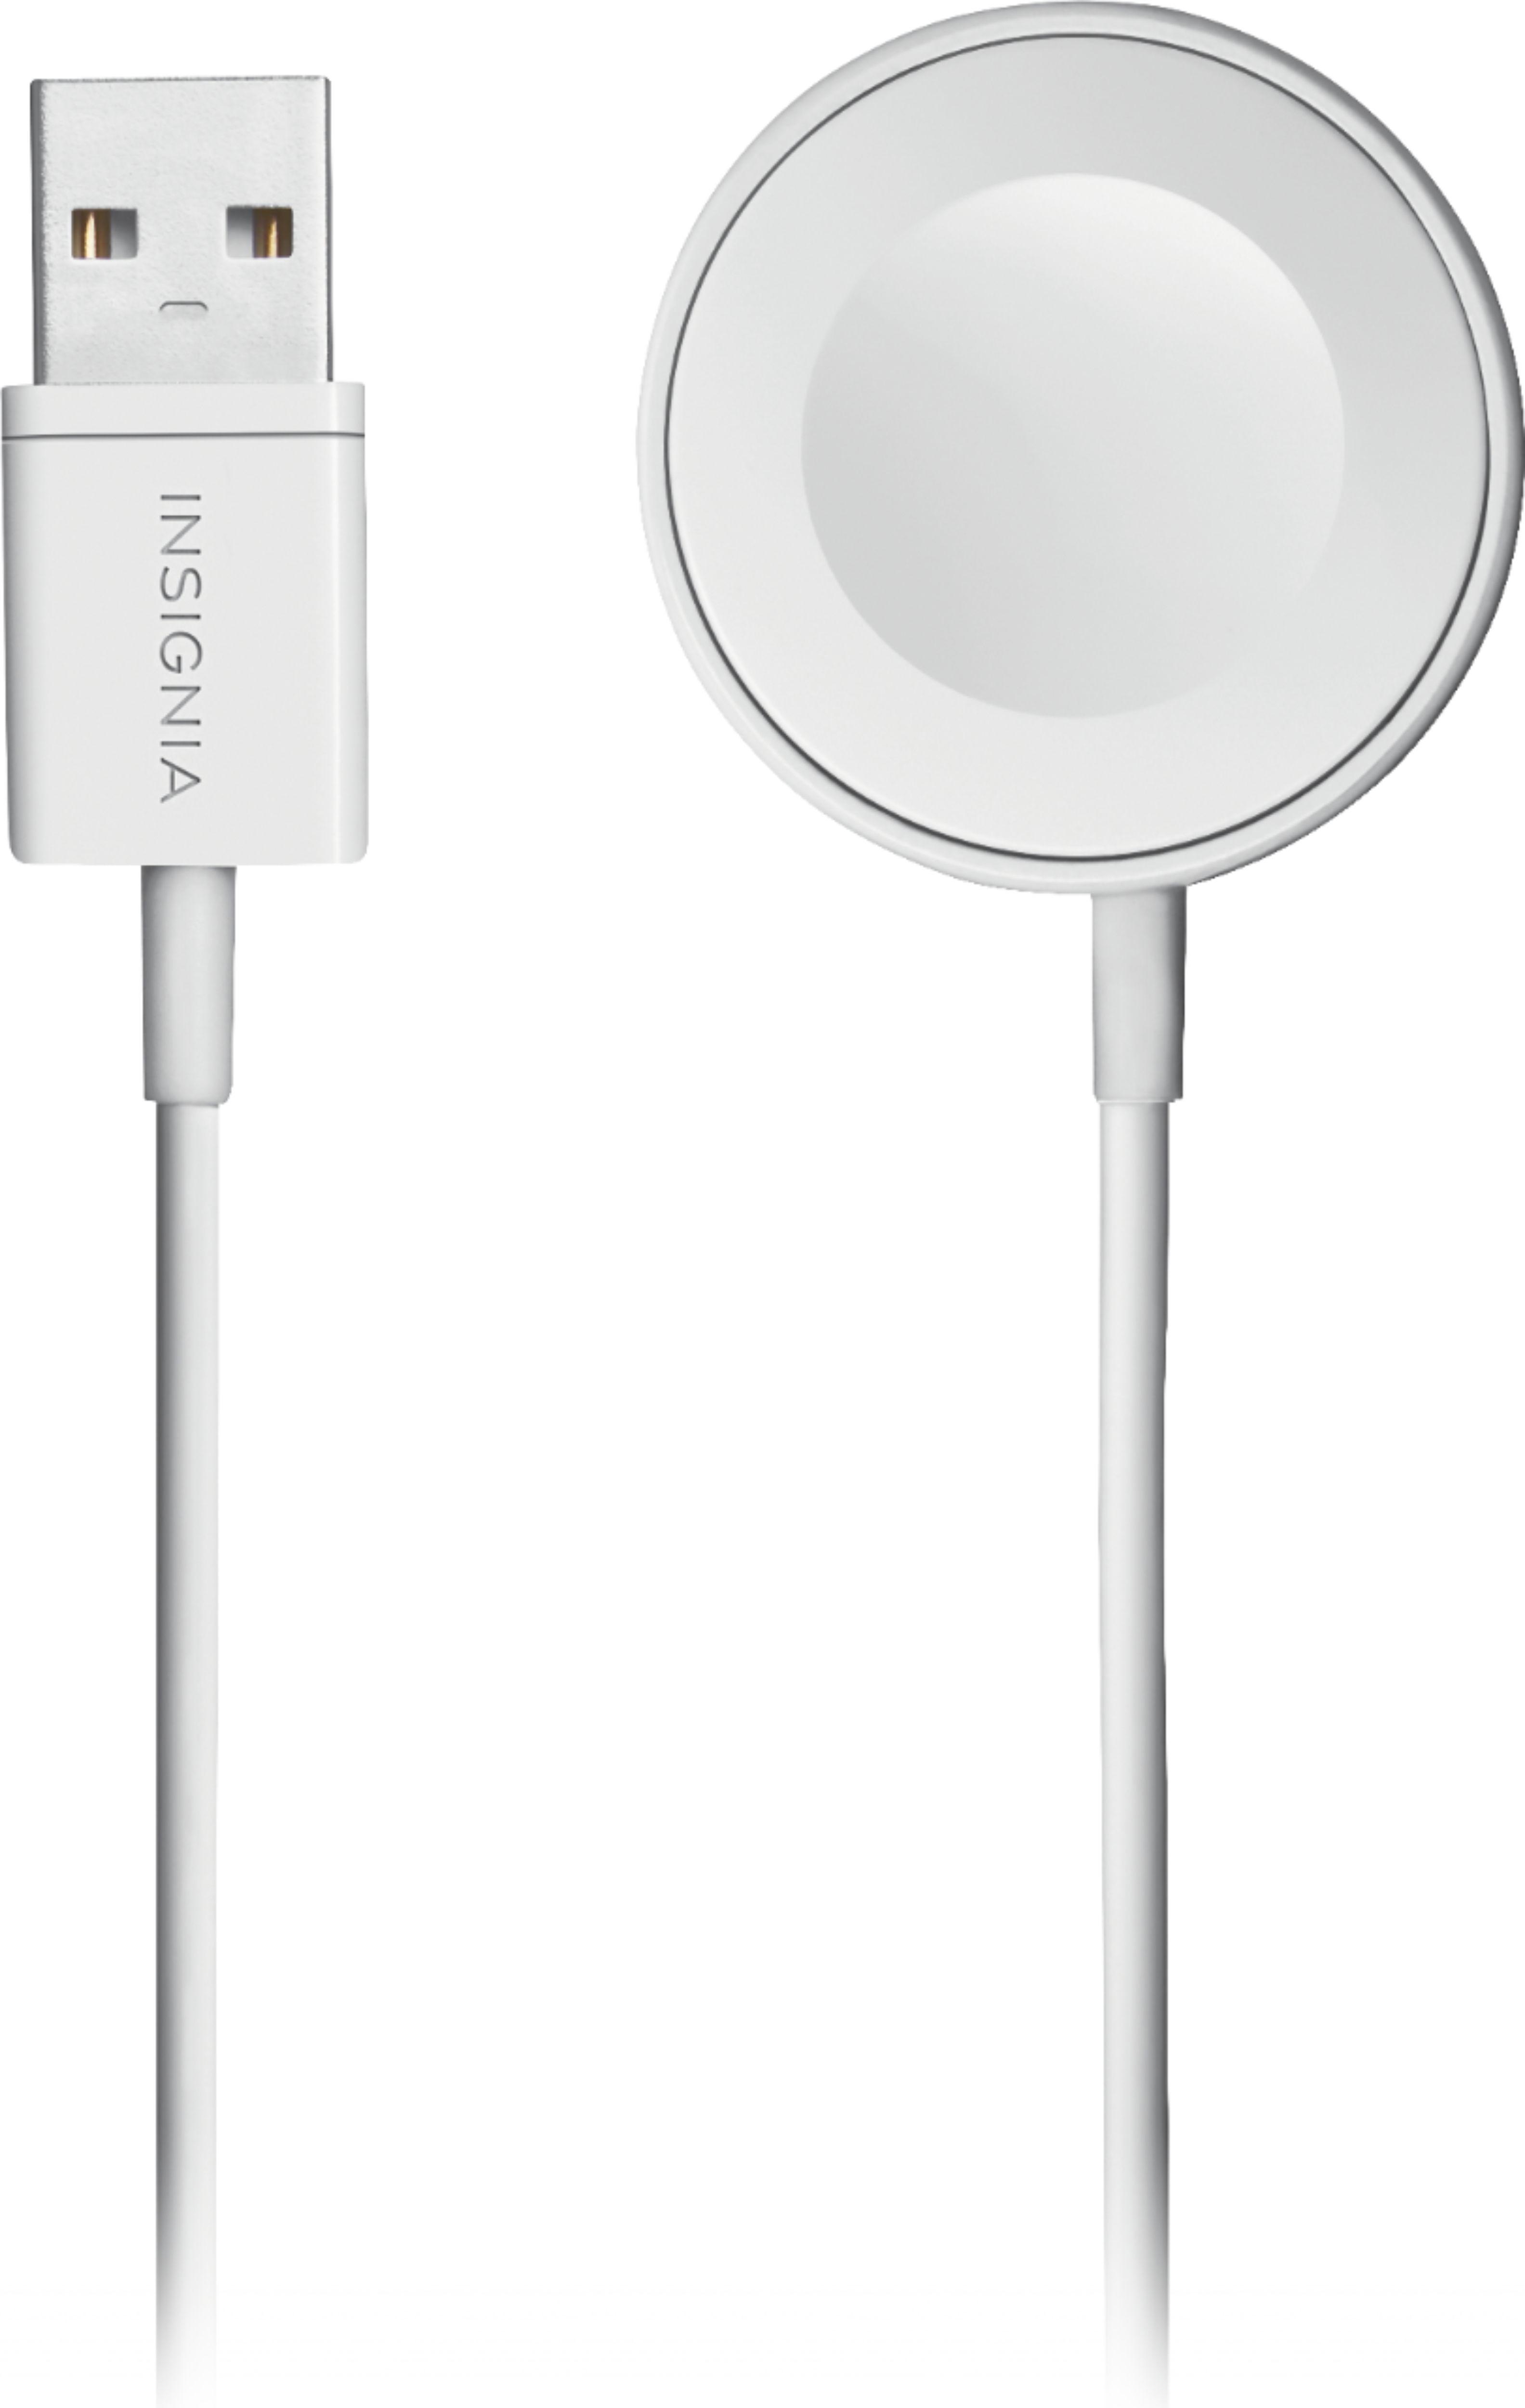 Third Generation Intelligent Magnetic USB Cable